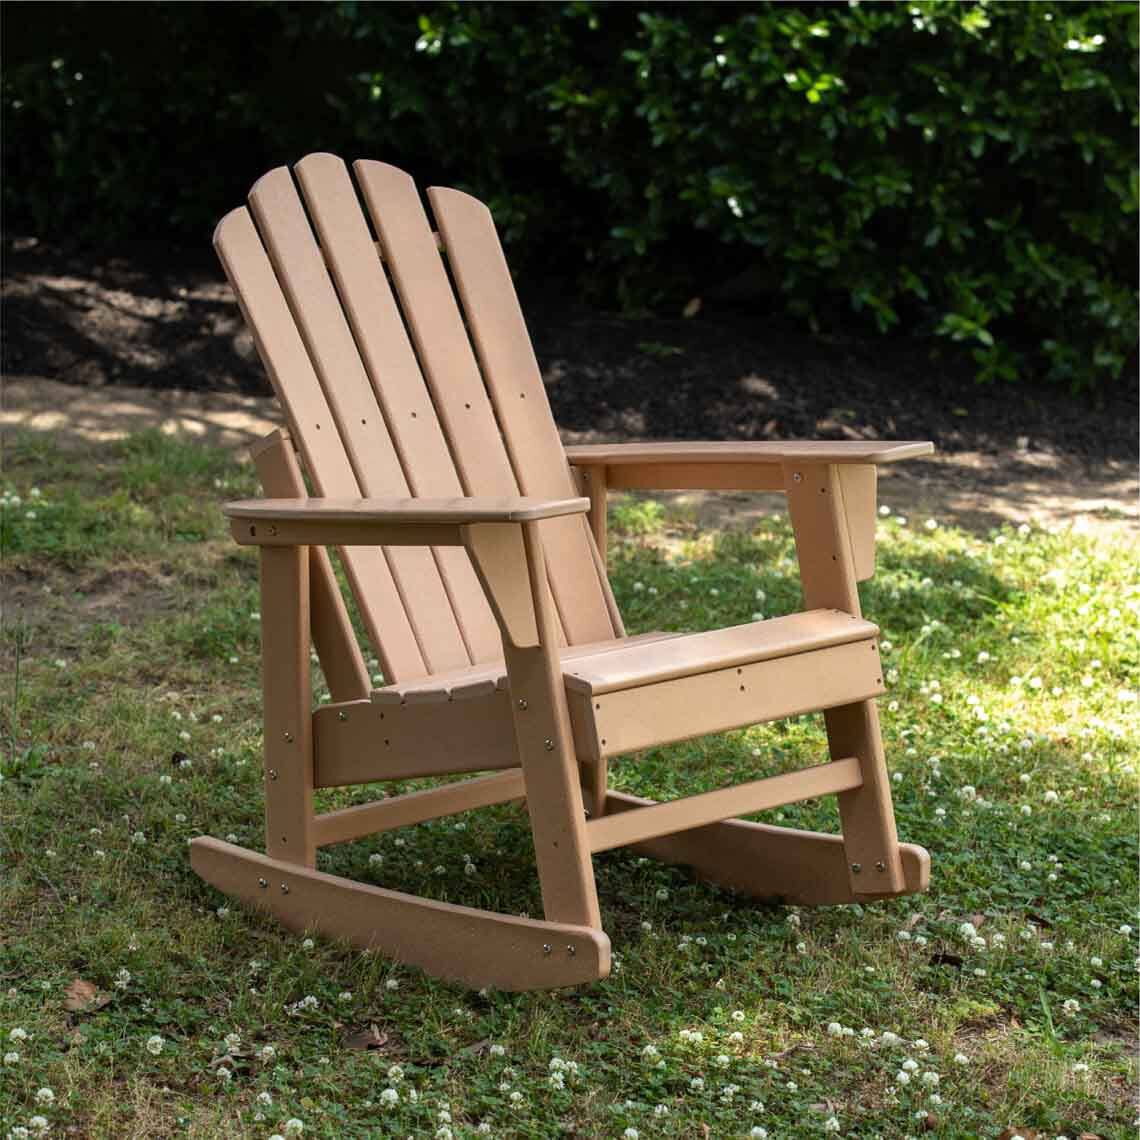 SCRATCH AND DENT - Everwood Hilltop Adirondack Rocking Chair - FINAL SALE - view 2